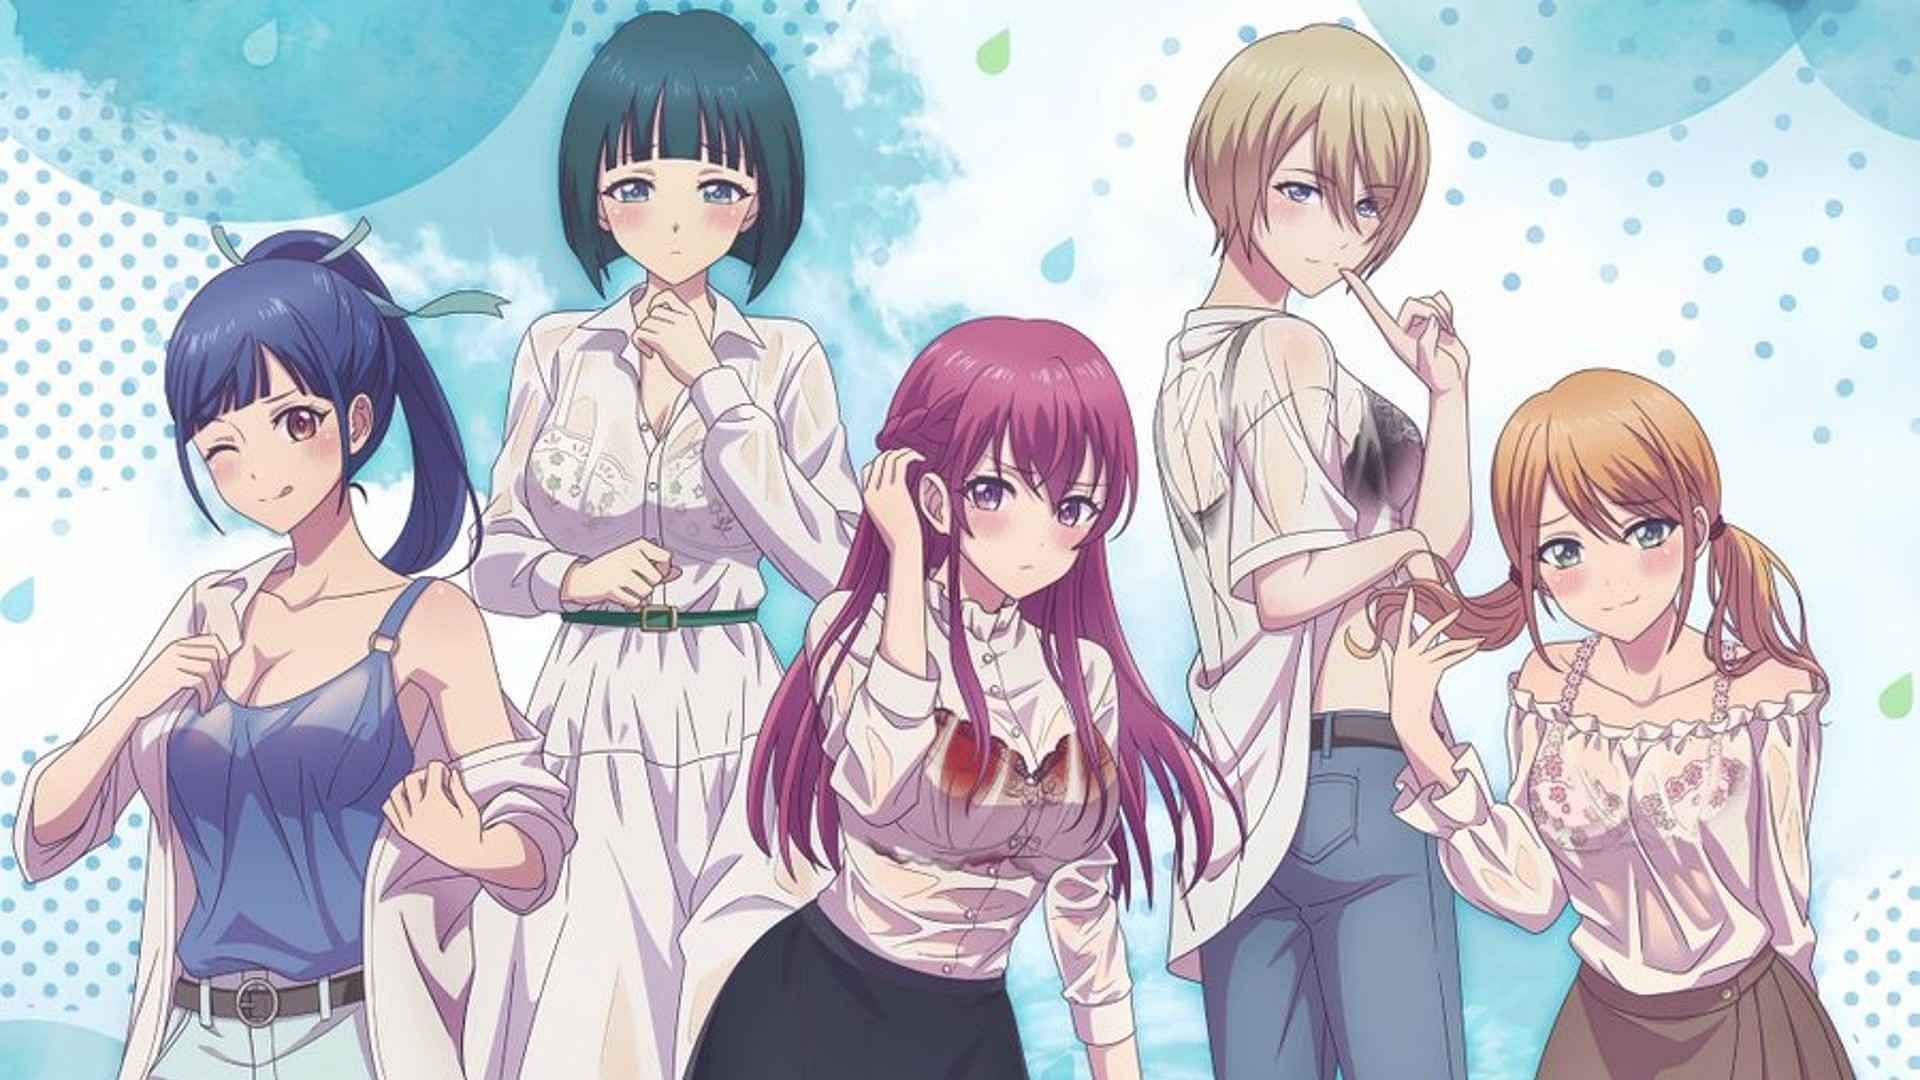 The Café Terrace and Its Goddesses season 2 confirmed for 2024